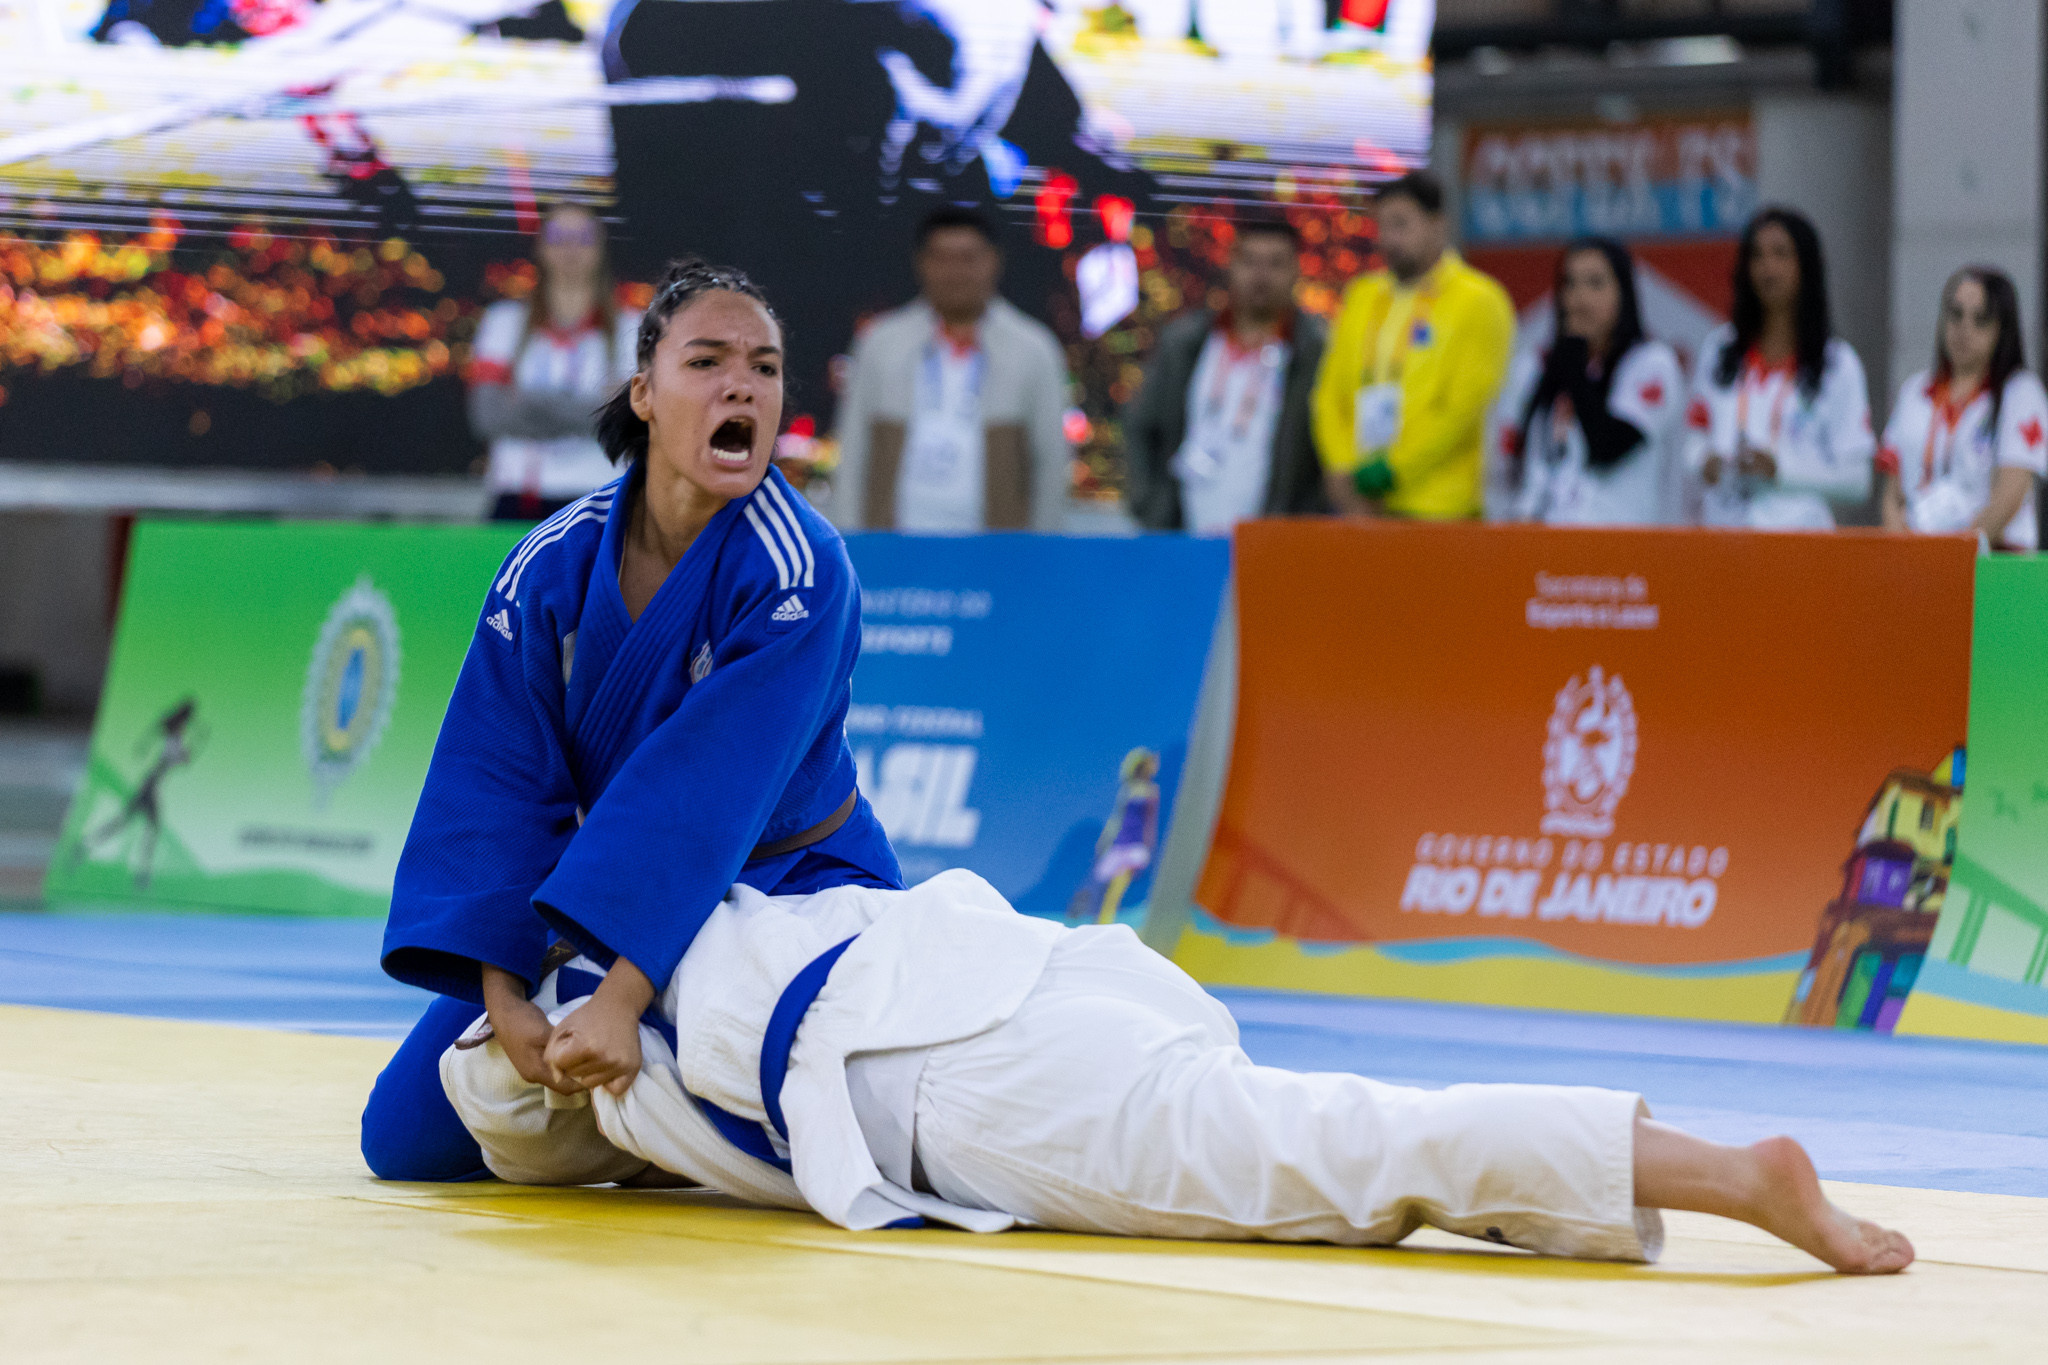 Judo was among the sports that took place on the final day ©ISF